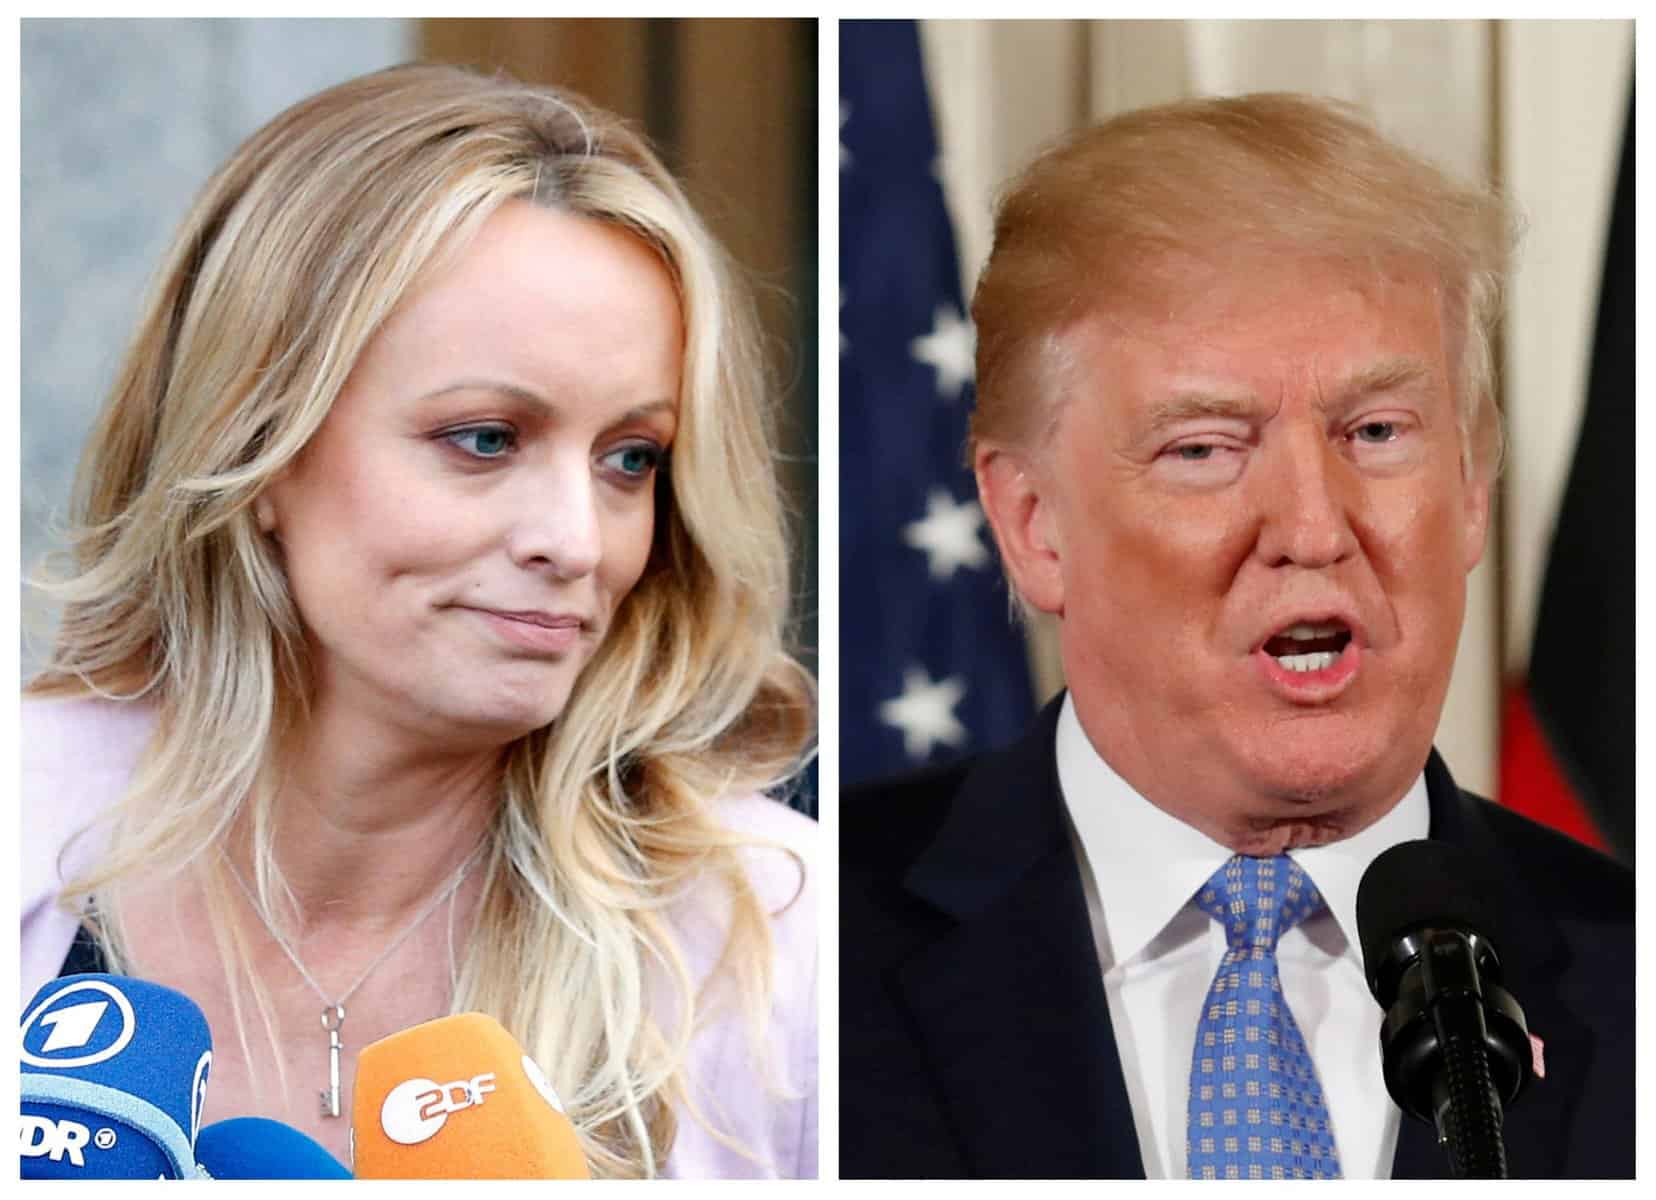 Stormy Daniels Agrees To Be A Criminal Witness Against Trump